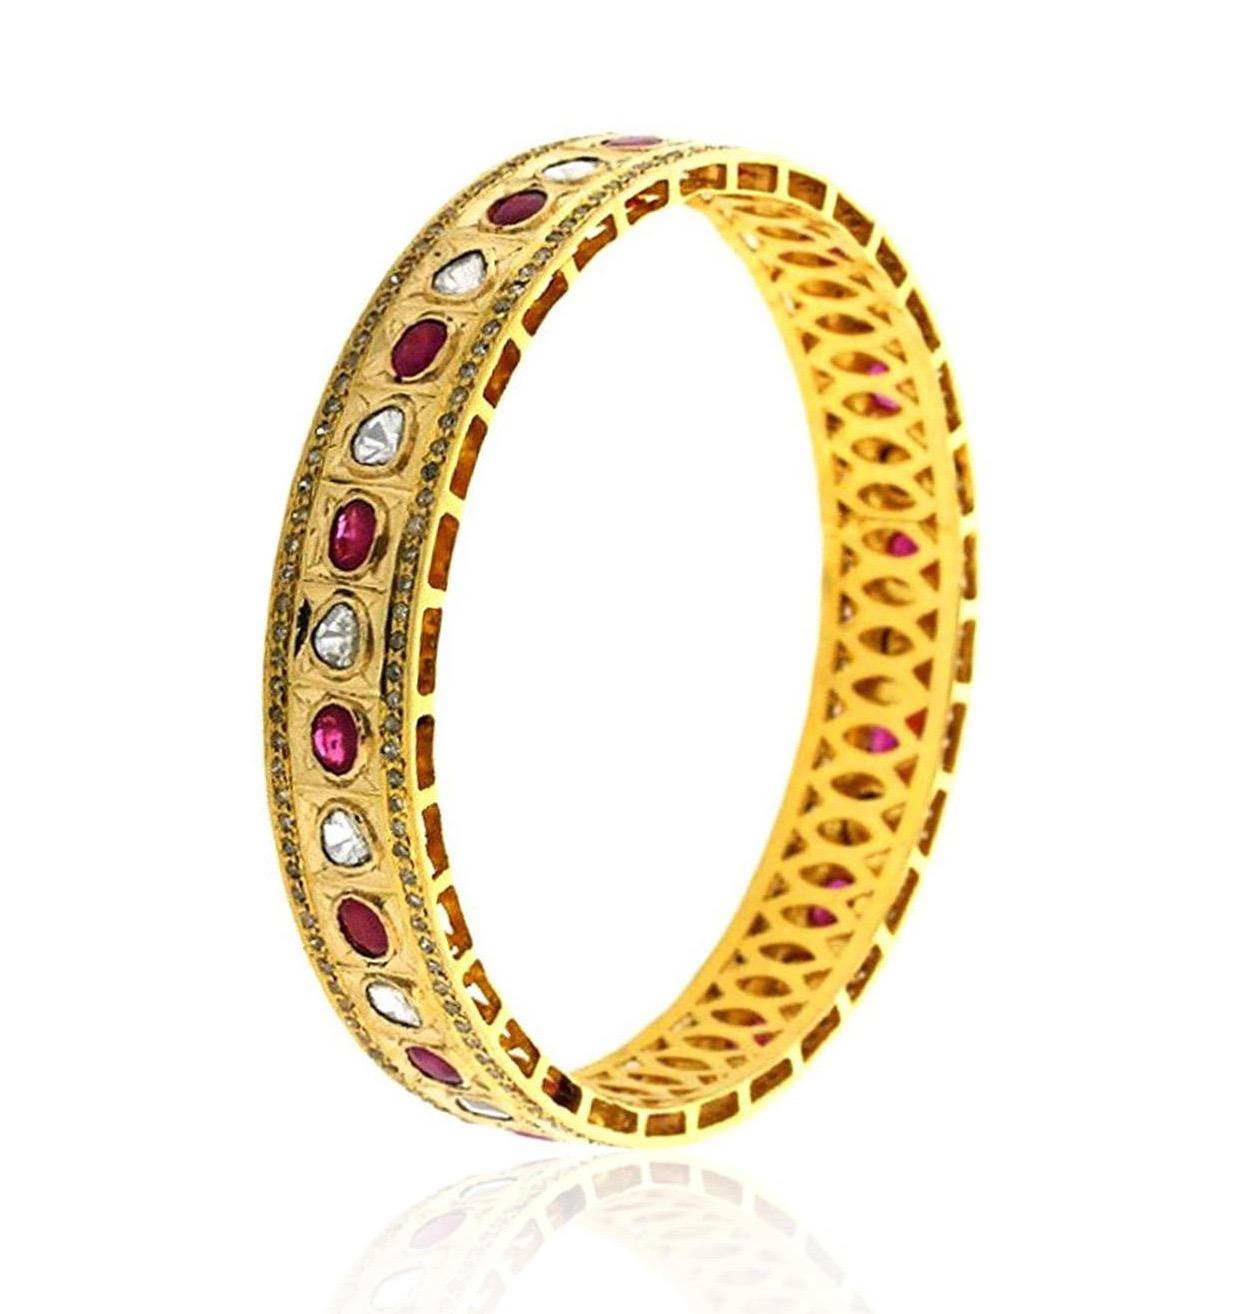 A stunning bracelet handmade in 14K gold. It is set in 4.0 carats ruby and 3.02 carats rosecut diamonds. Clasp Closure

FOLLOW  MEGHNA JEWELS storefront to view the latest collection & exclusive pieces.  Meghna Jewels is proudly rated as a Top